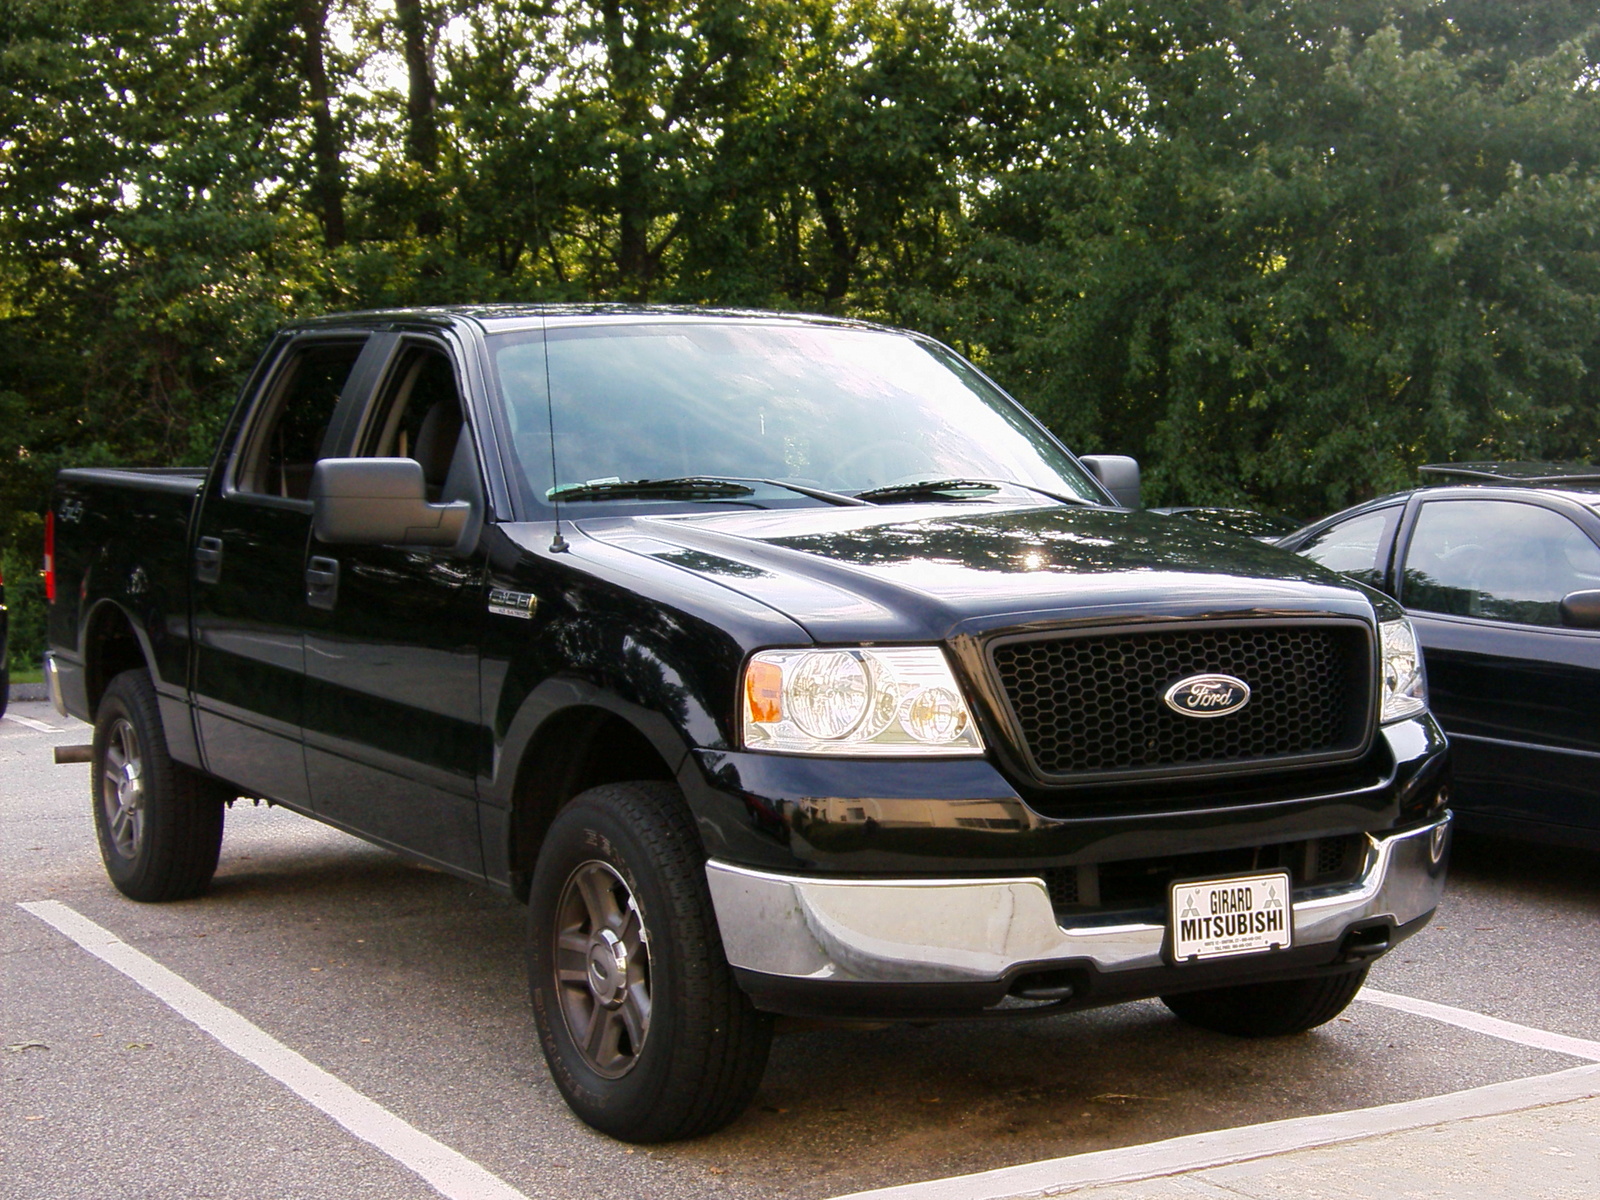 2005 Ford F-150 - Pictures - CarGurus